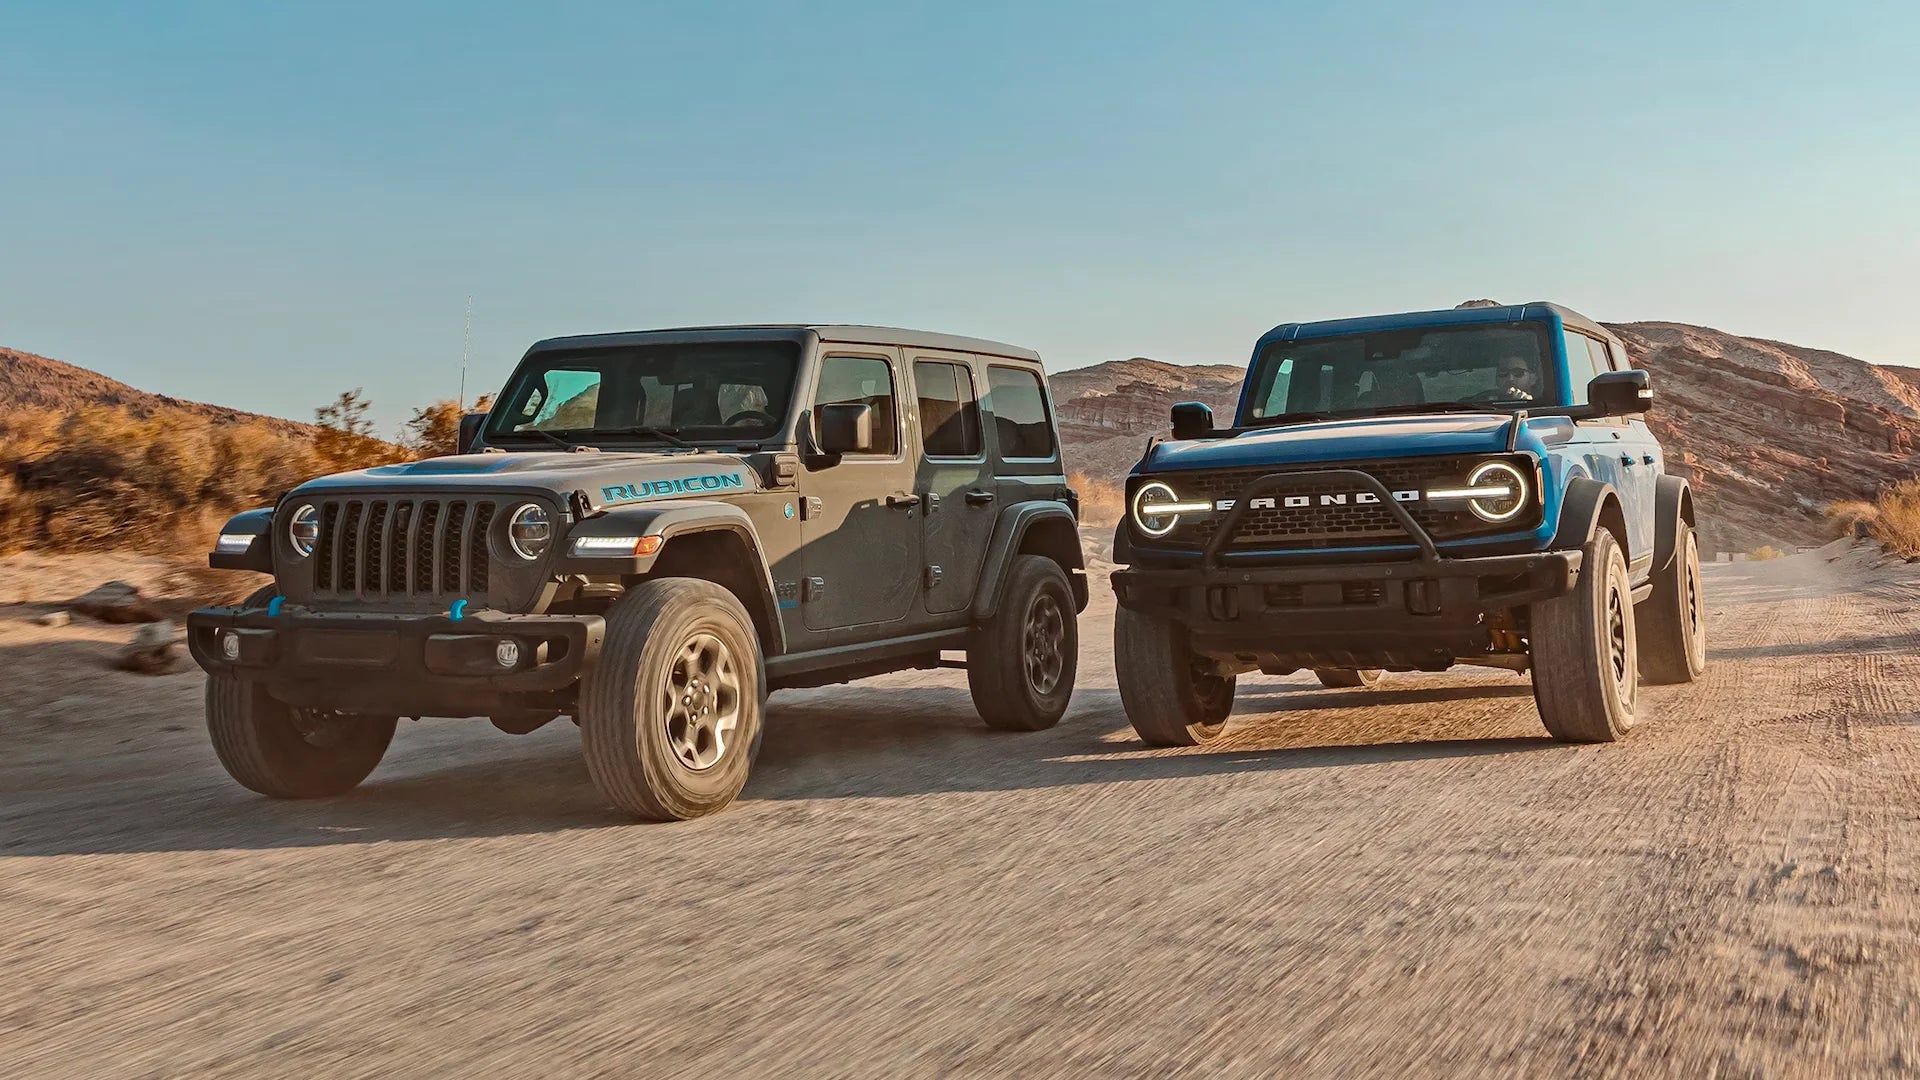 15 Reasons Why The Ford Bronco Is Better Than The Jeep Wrangler